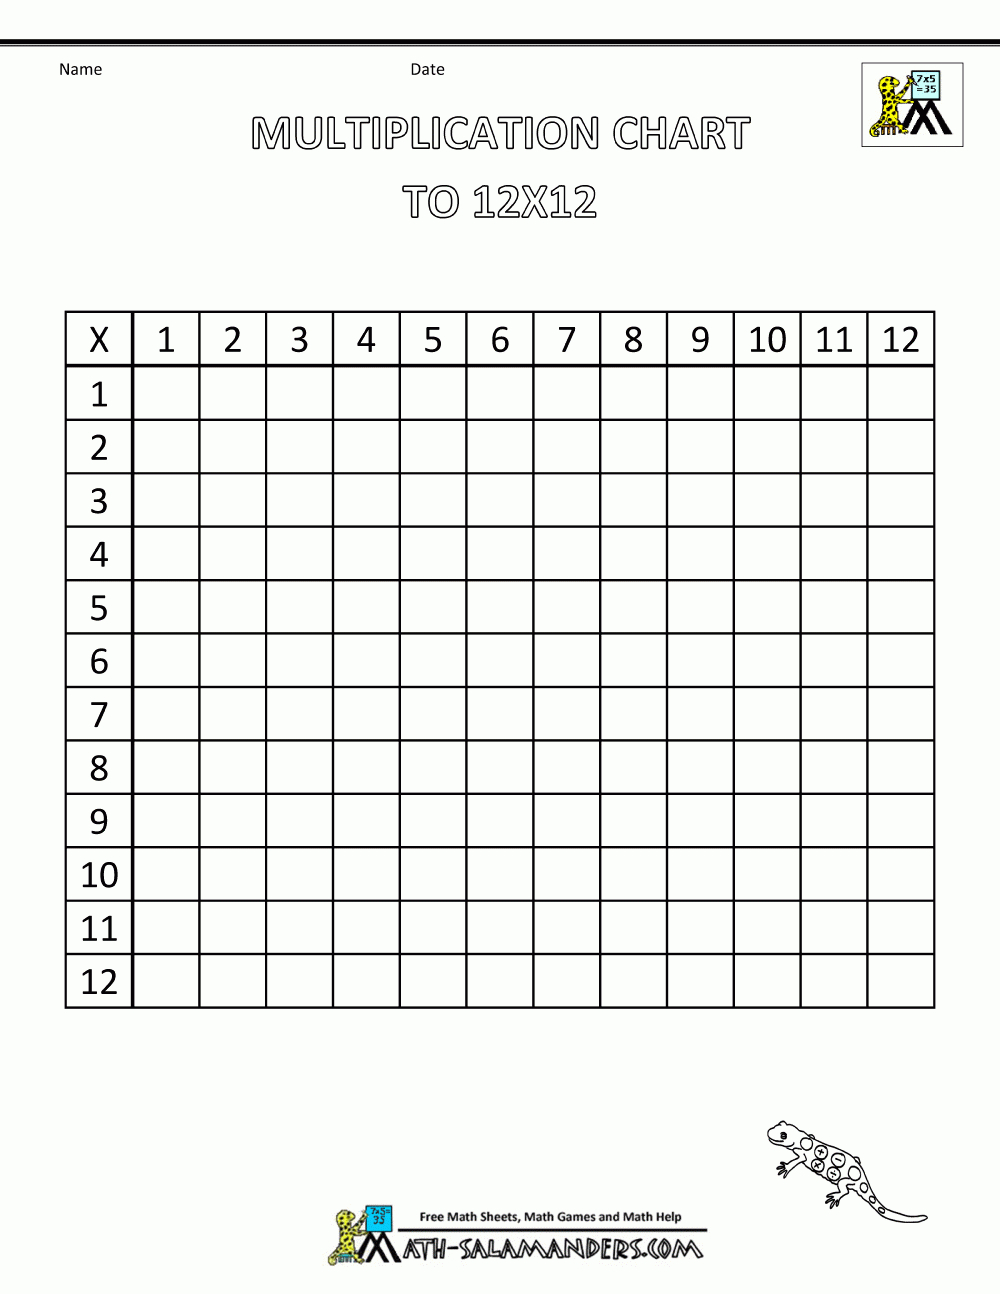 Multiplication Times Table Chart To 12X12 Blank pertaining to Printable Blank Multiplication Chart 0-12